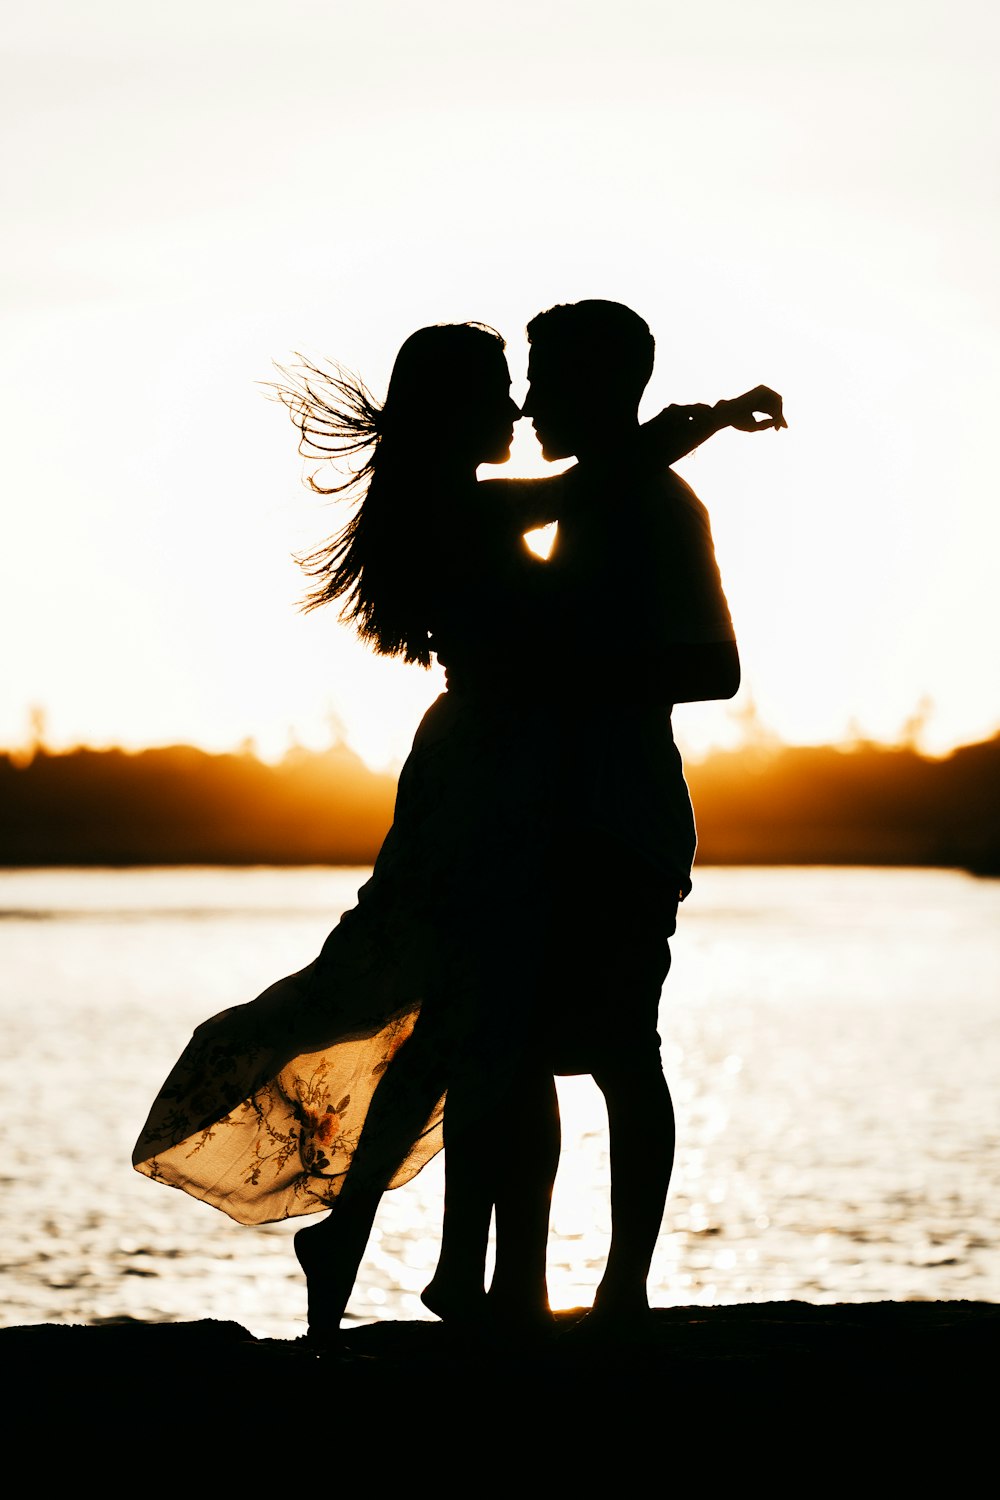 Couple Silhouette Pictures | Download Free Images on Unsplash